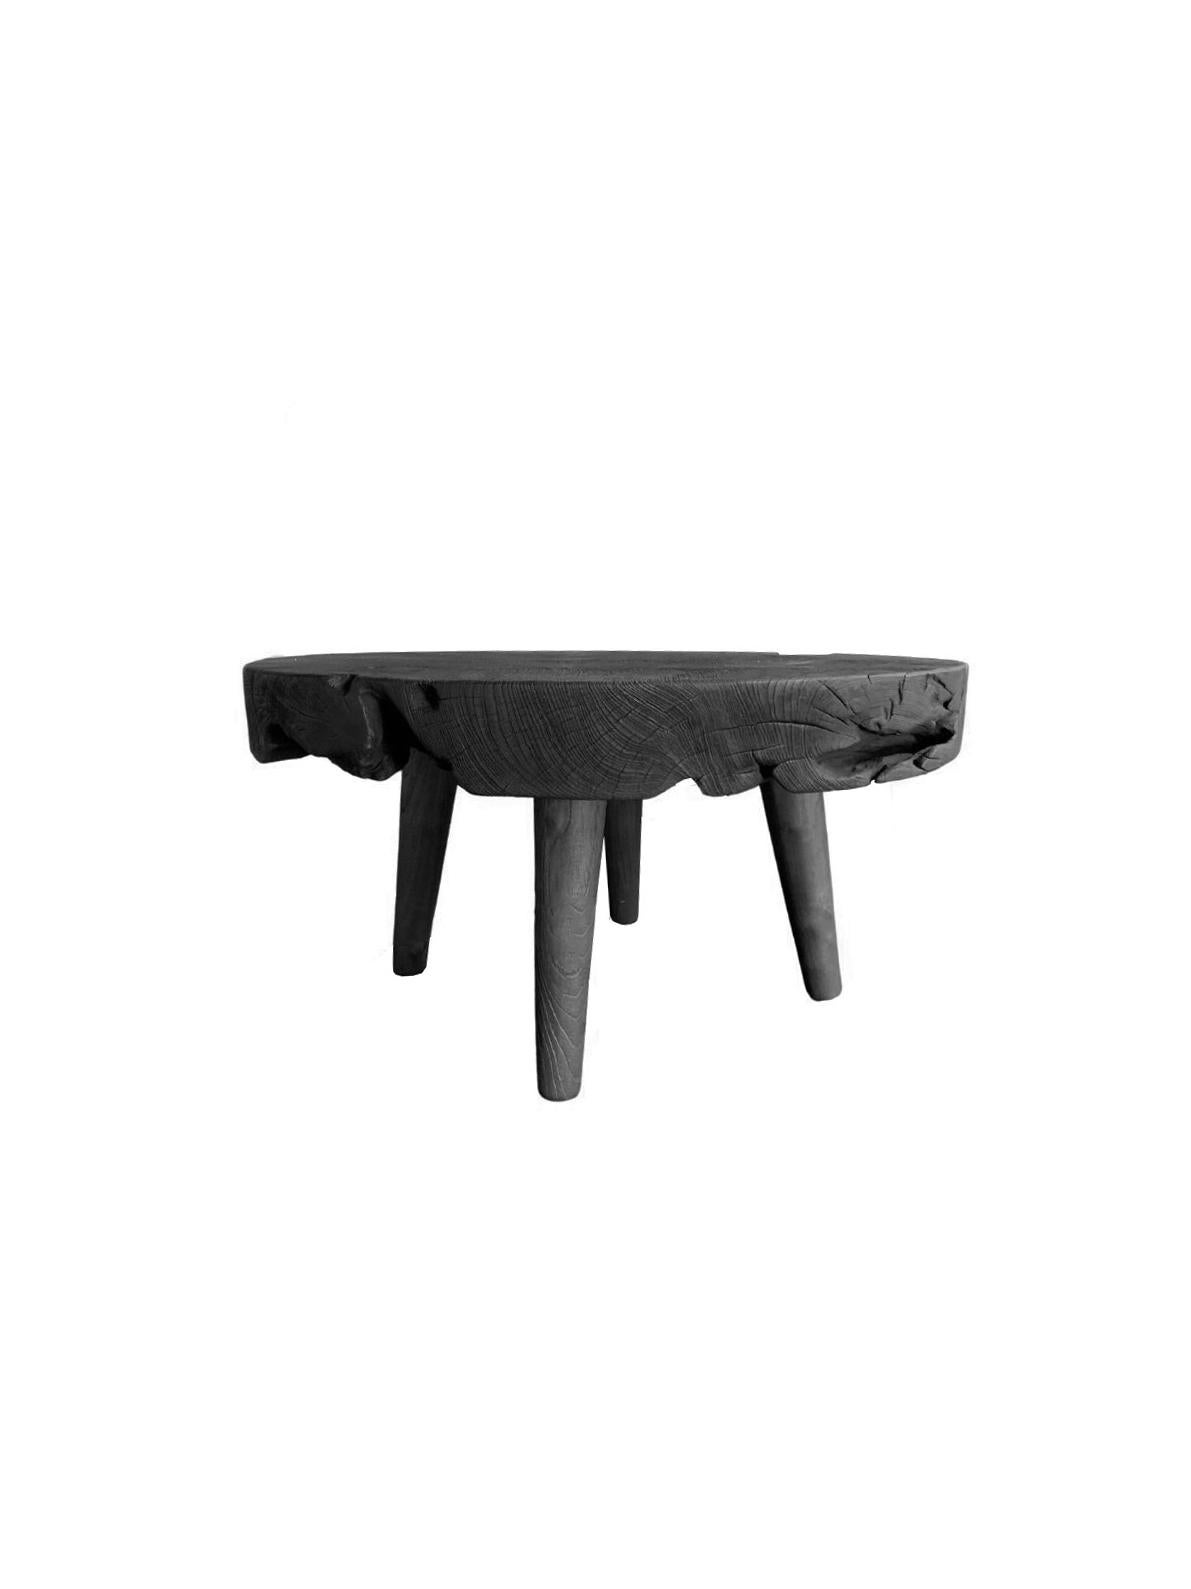 Indonesian Modern Organic Side Table Crafted from Mango Wood Burnt Finish For Sale